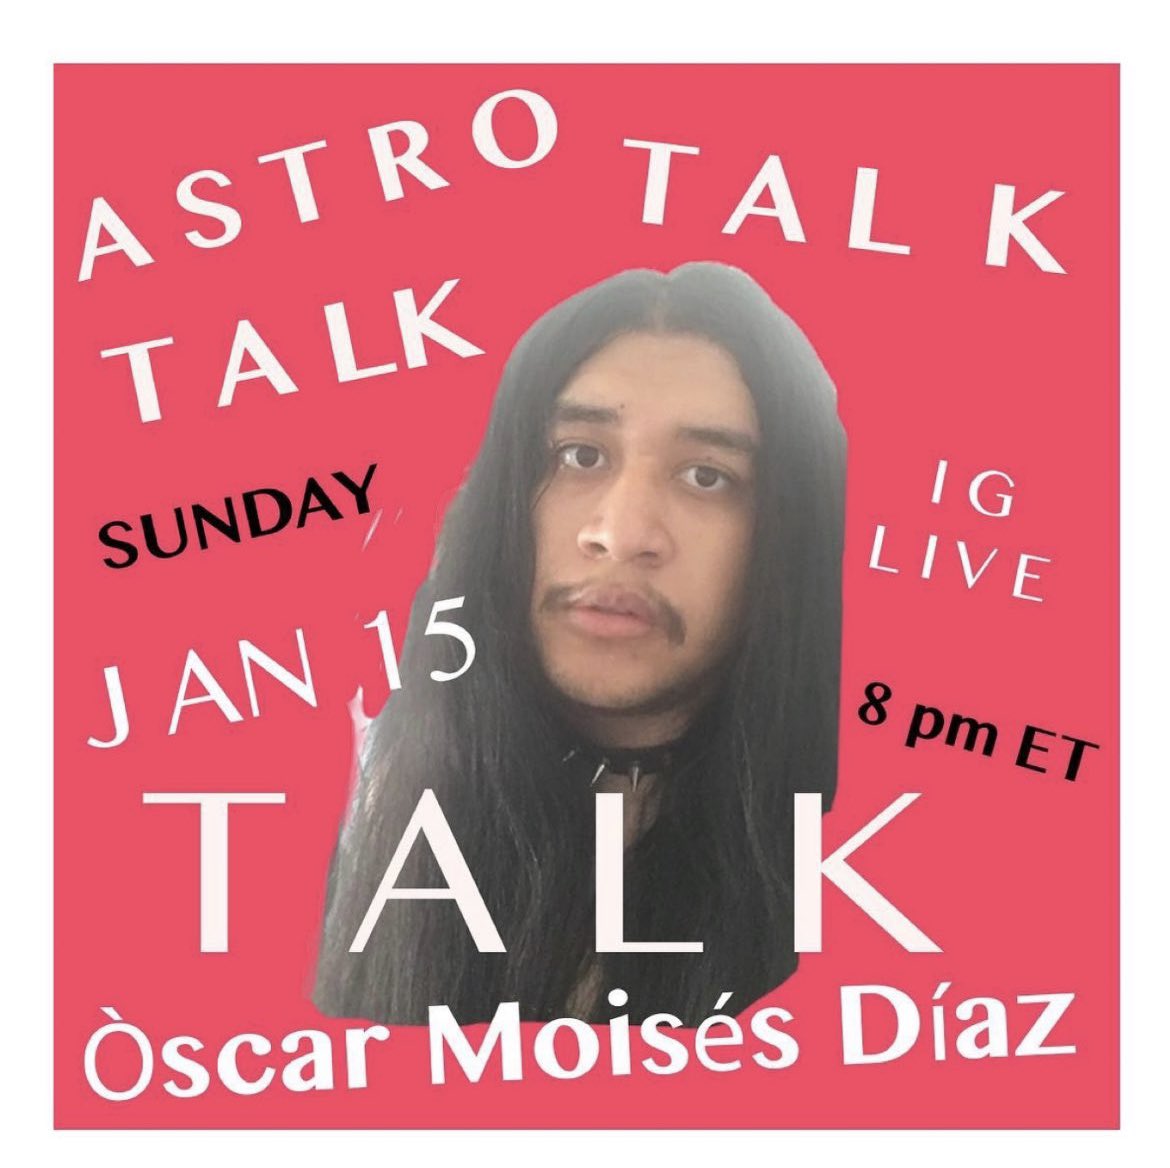 I’ll be live on instagram Live talking to CV Henriette of Astro tAlkTaLkTALK at 8pm est today Jan 15th about poetry+astrology and so much more. Tune in on IG: instagram.com/art_of_the_zod…